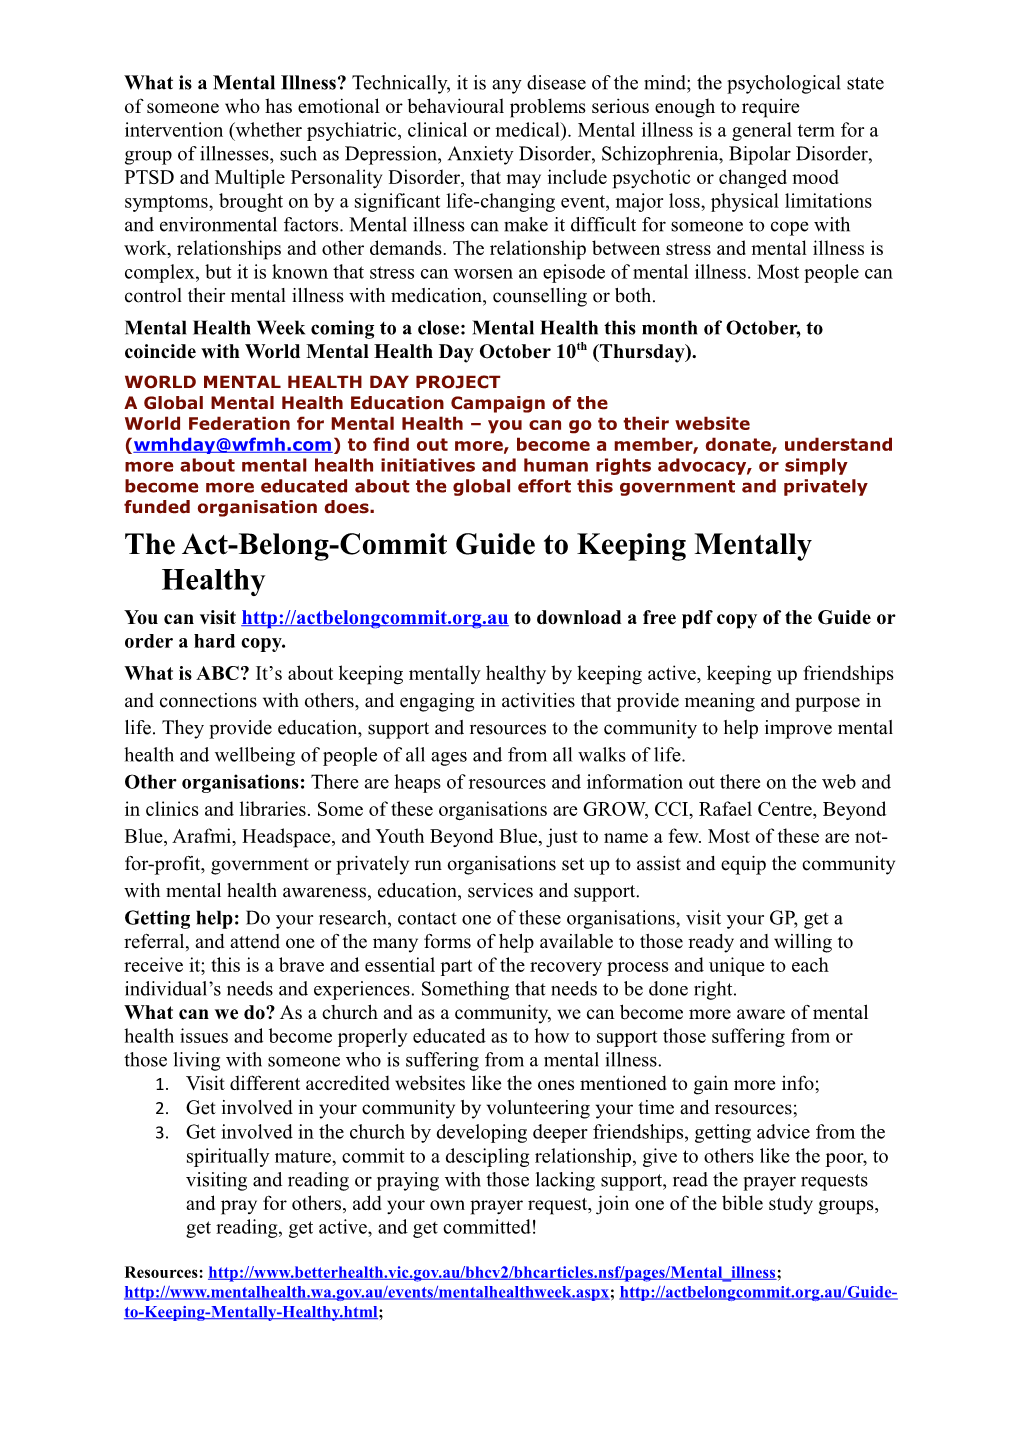 The Act-Belong-Commit Guide to Keeping Mentally Healthy